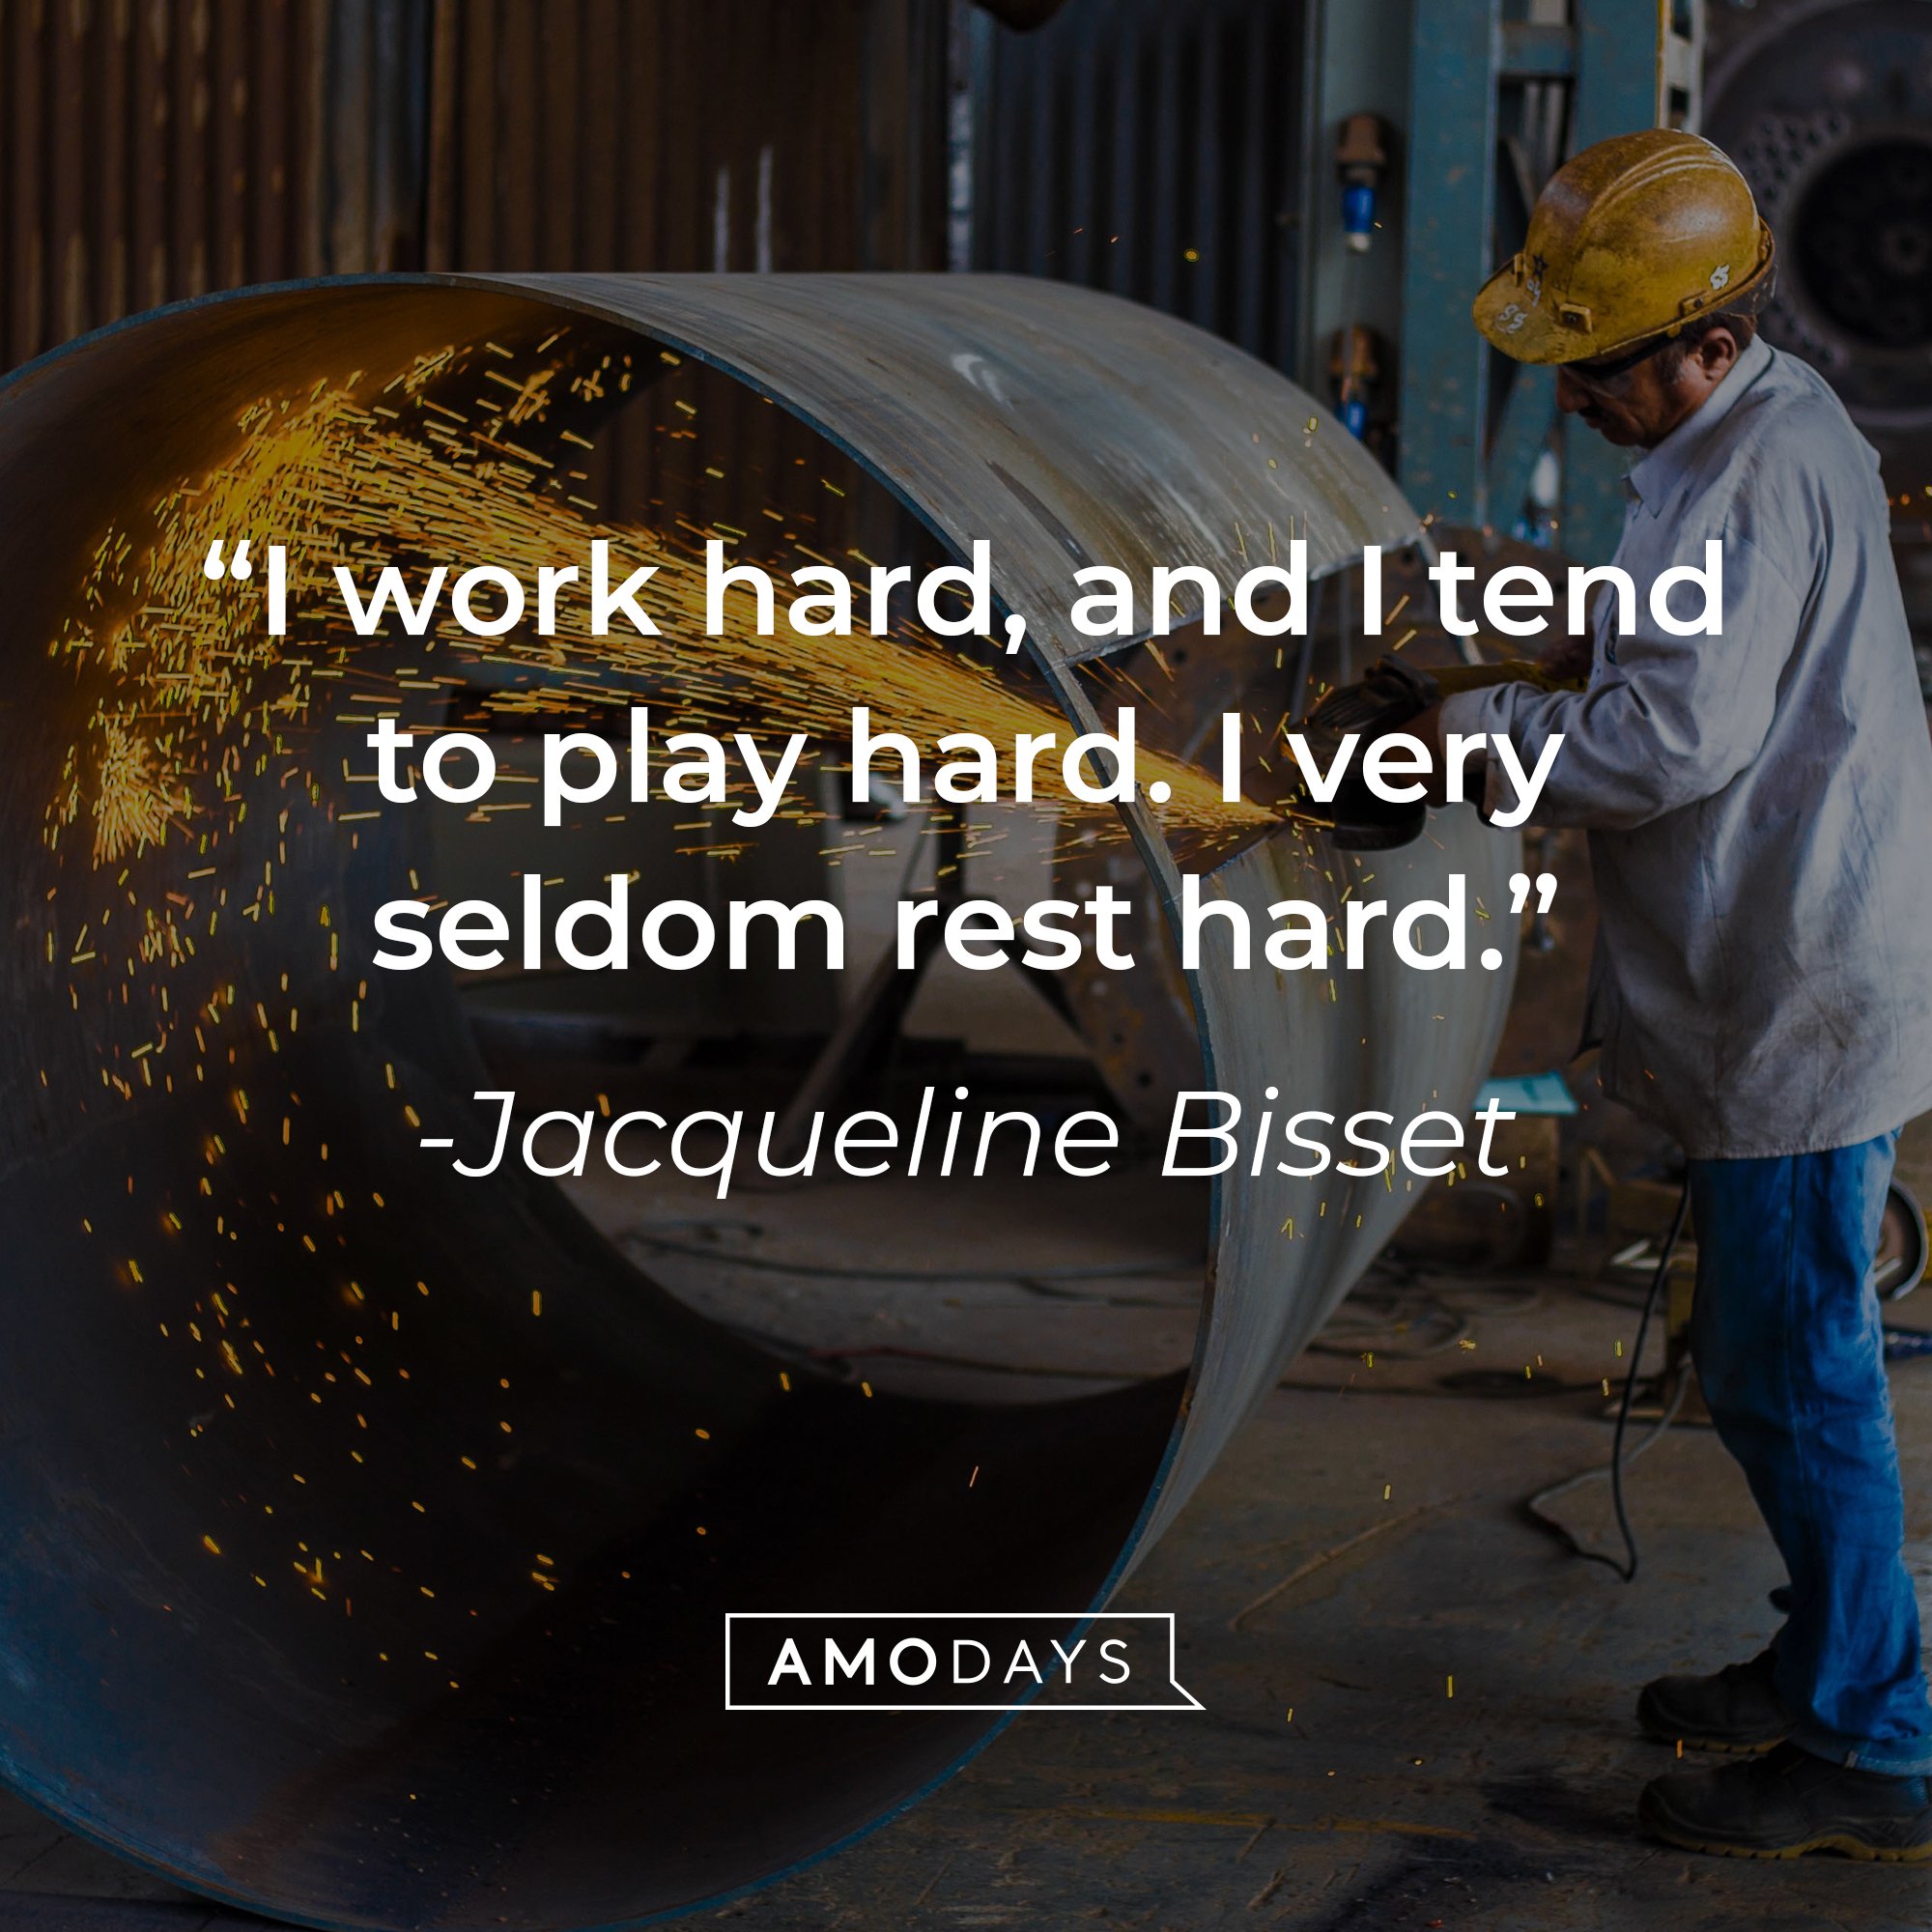 Jacqueline Bisset's quote: "I work hard, and I tend to play hard. I very seldom rest hard." | Image: AmoDays